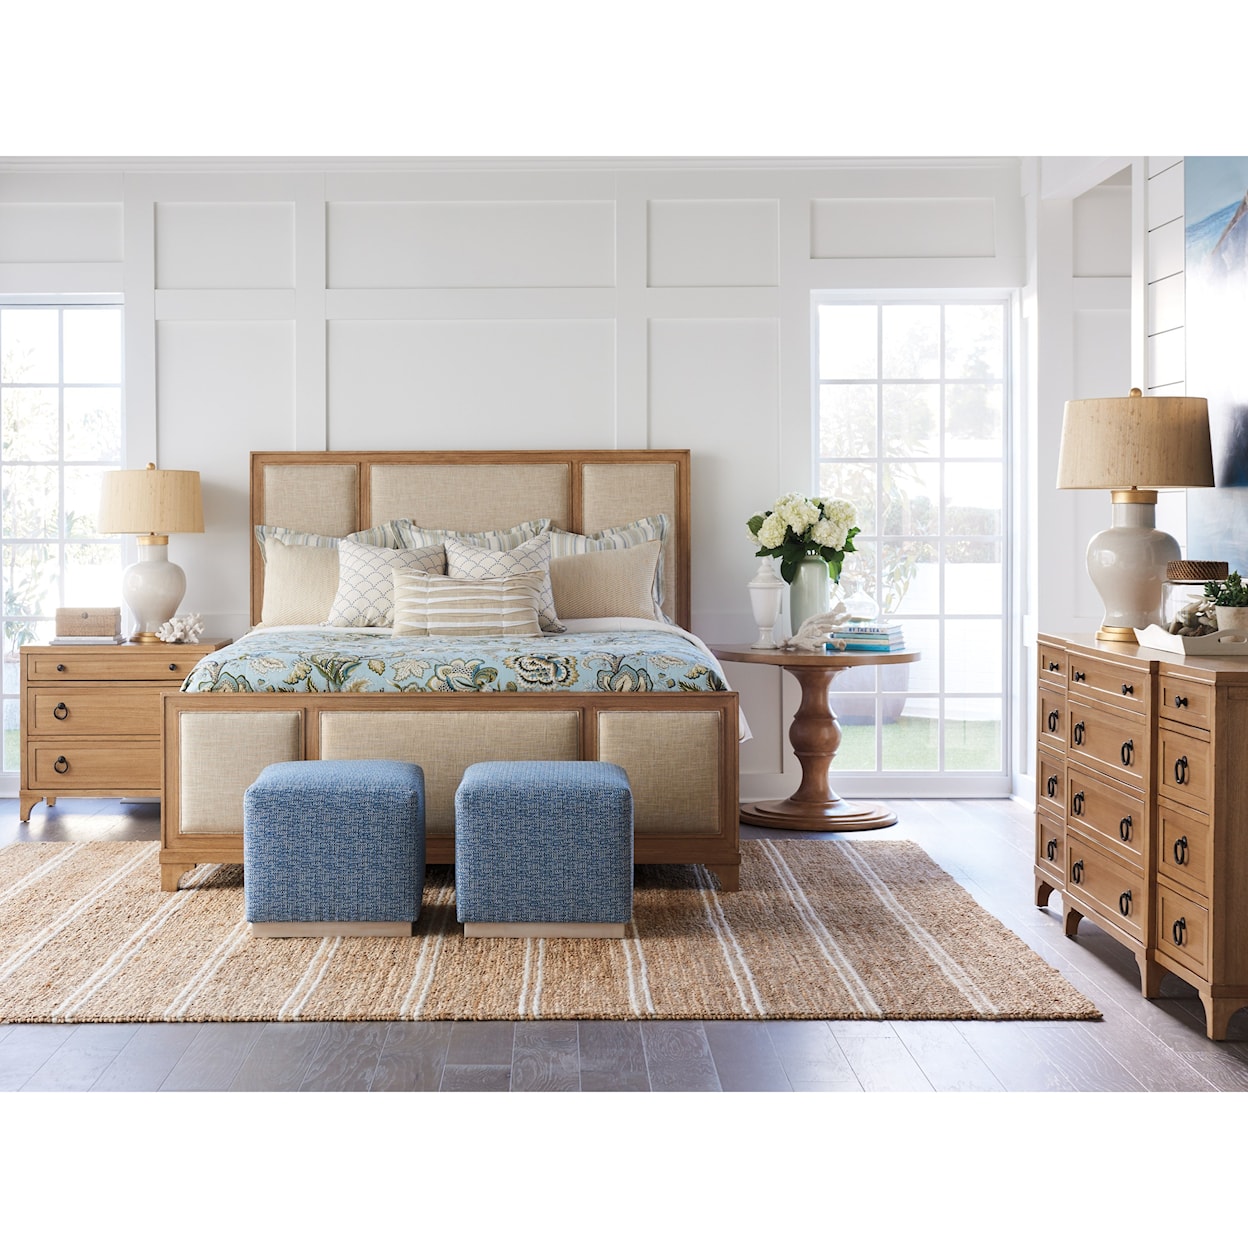 Barclay Butera Newport Crystal Cove Upholstered Panel Bed 5/0 Queen